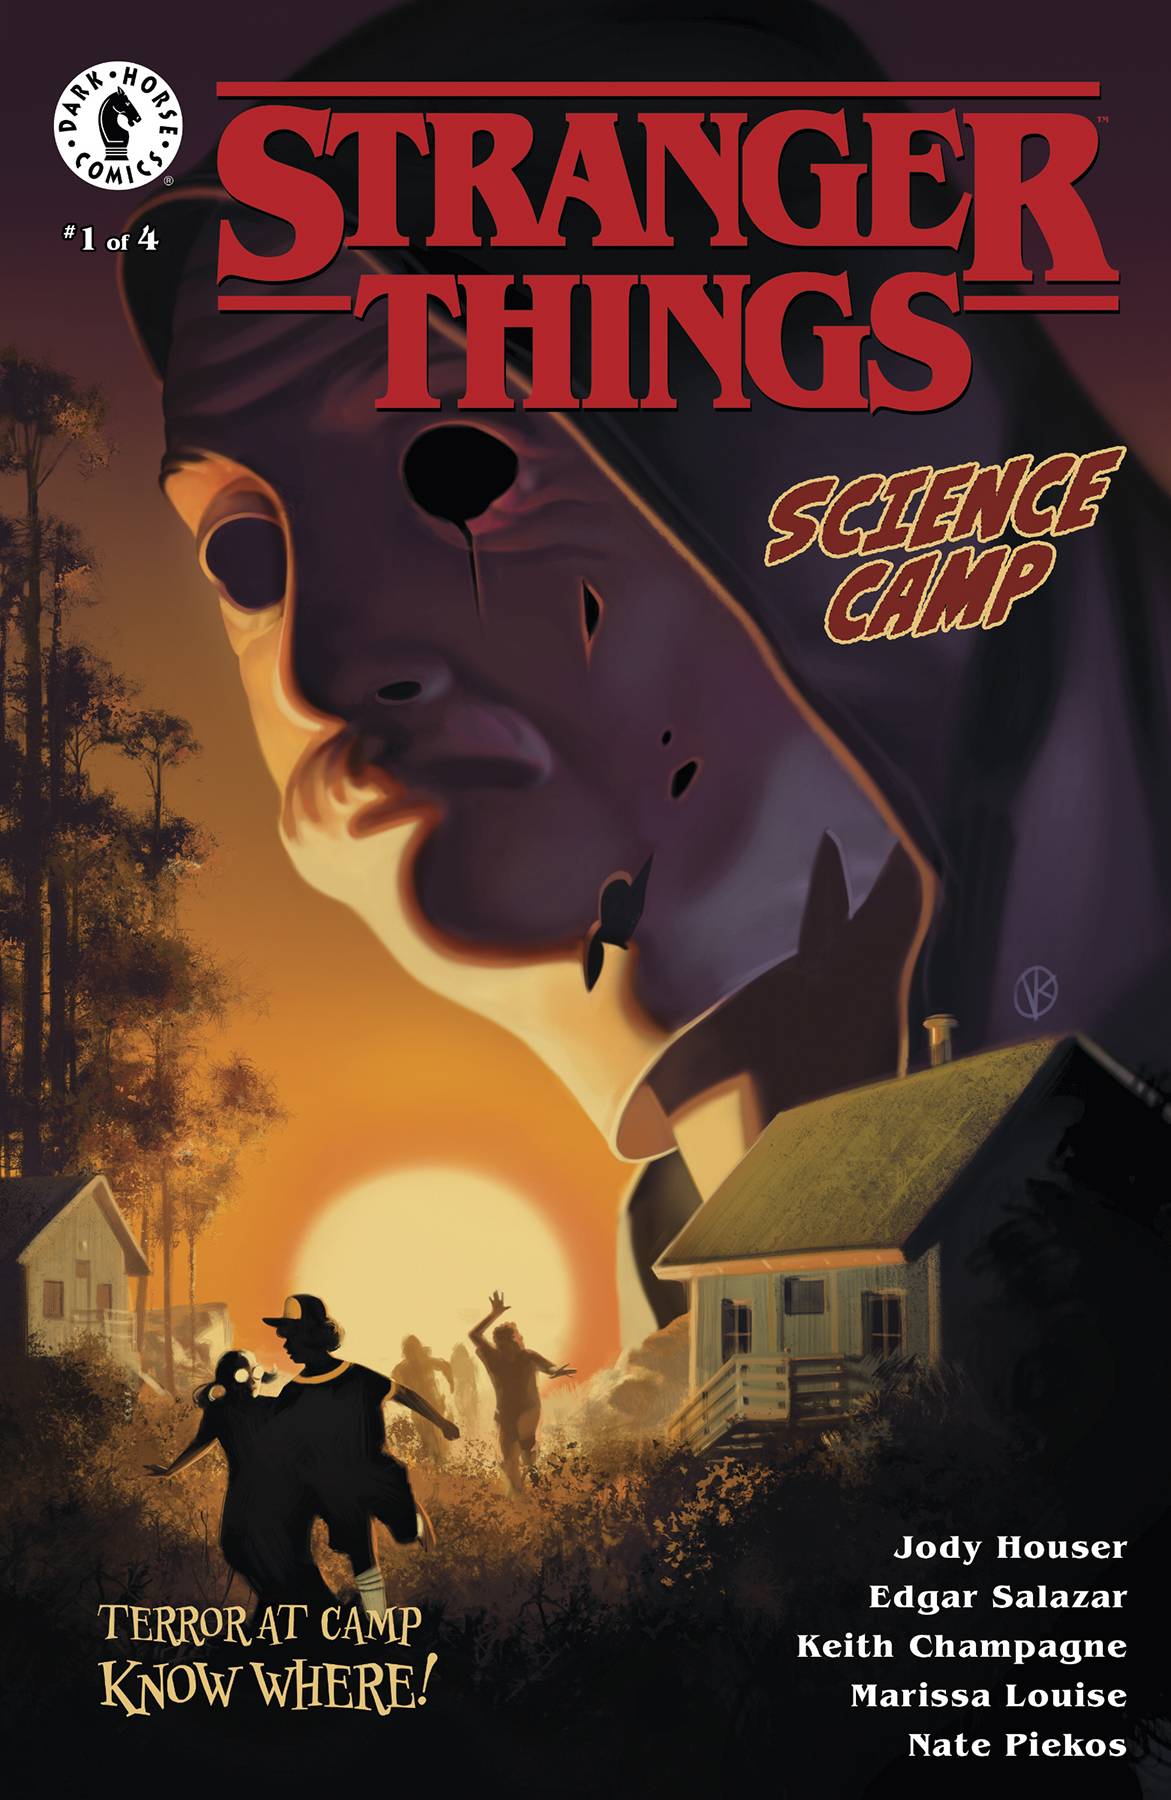 STRANGER THINGS SCIENCE CAMP #1 (OF 4) CVR A KALVACHEV | L.A. Mood Comics and Games